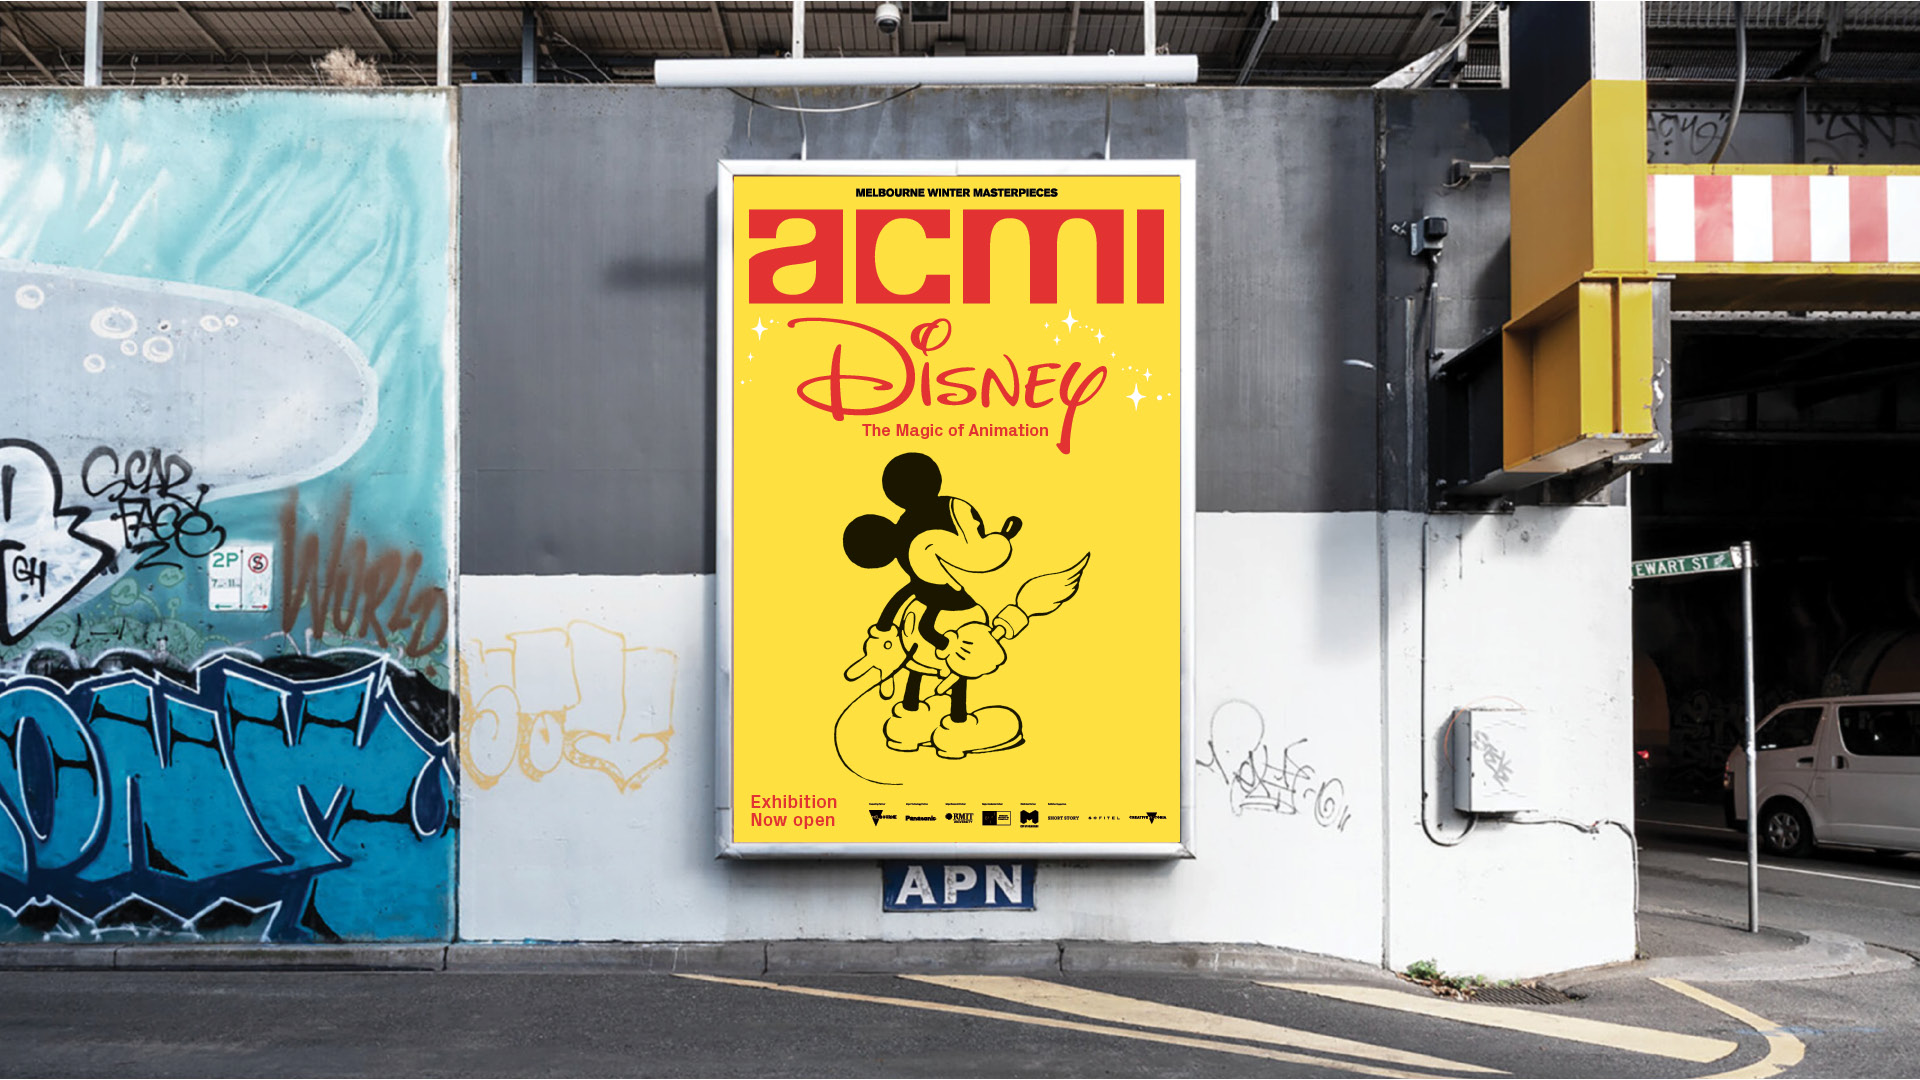 Disney Exhibition Campaign: Billboard/Tram and Street Poster